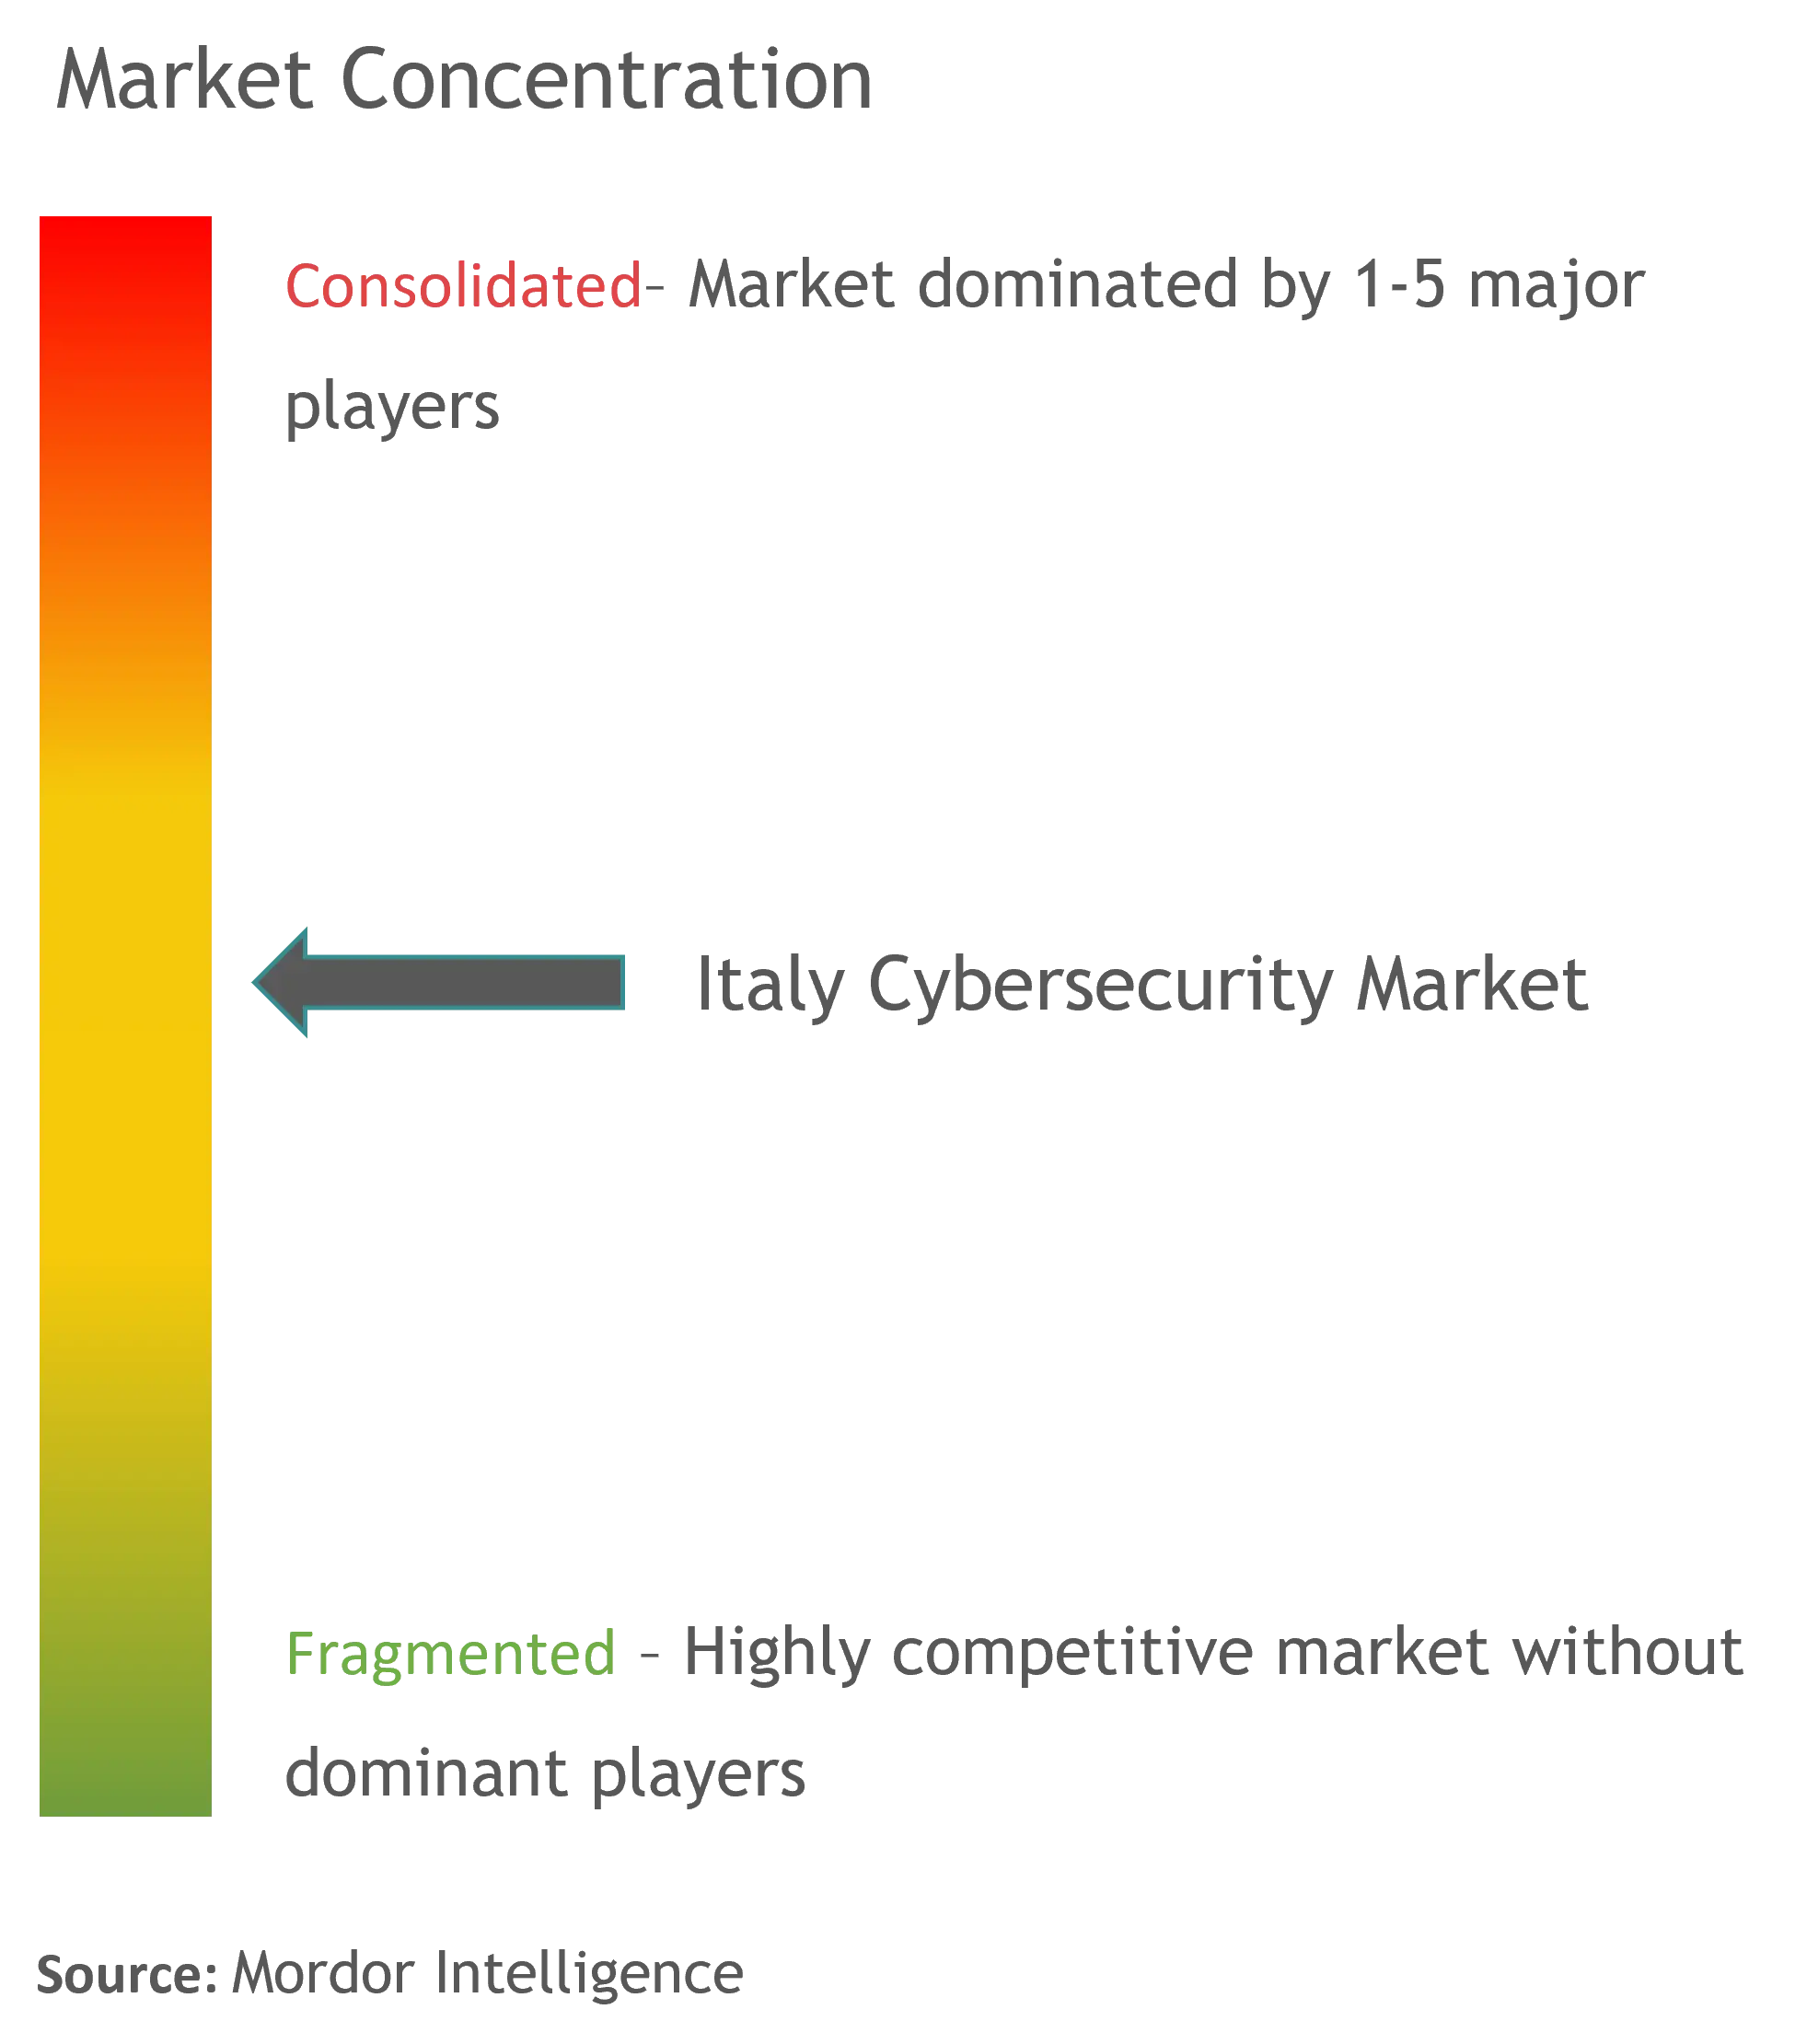 Italy Cybersecurity Market Concentration